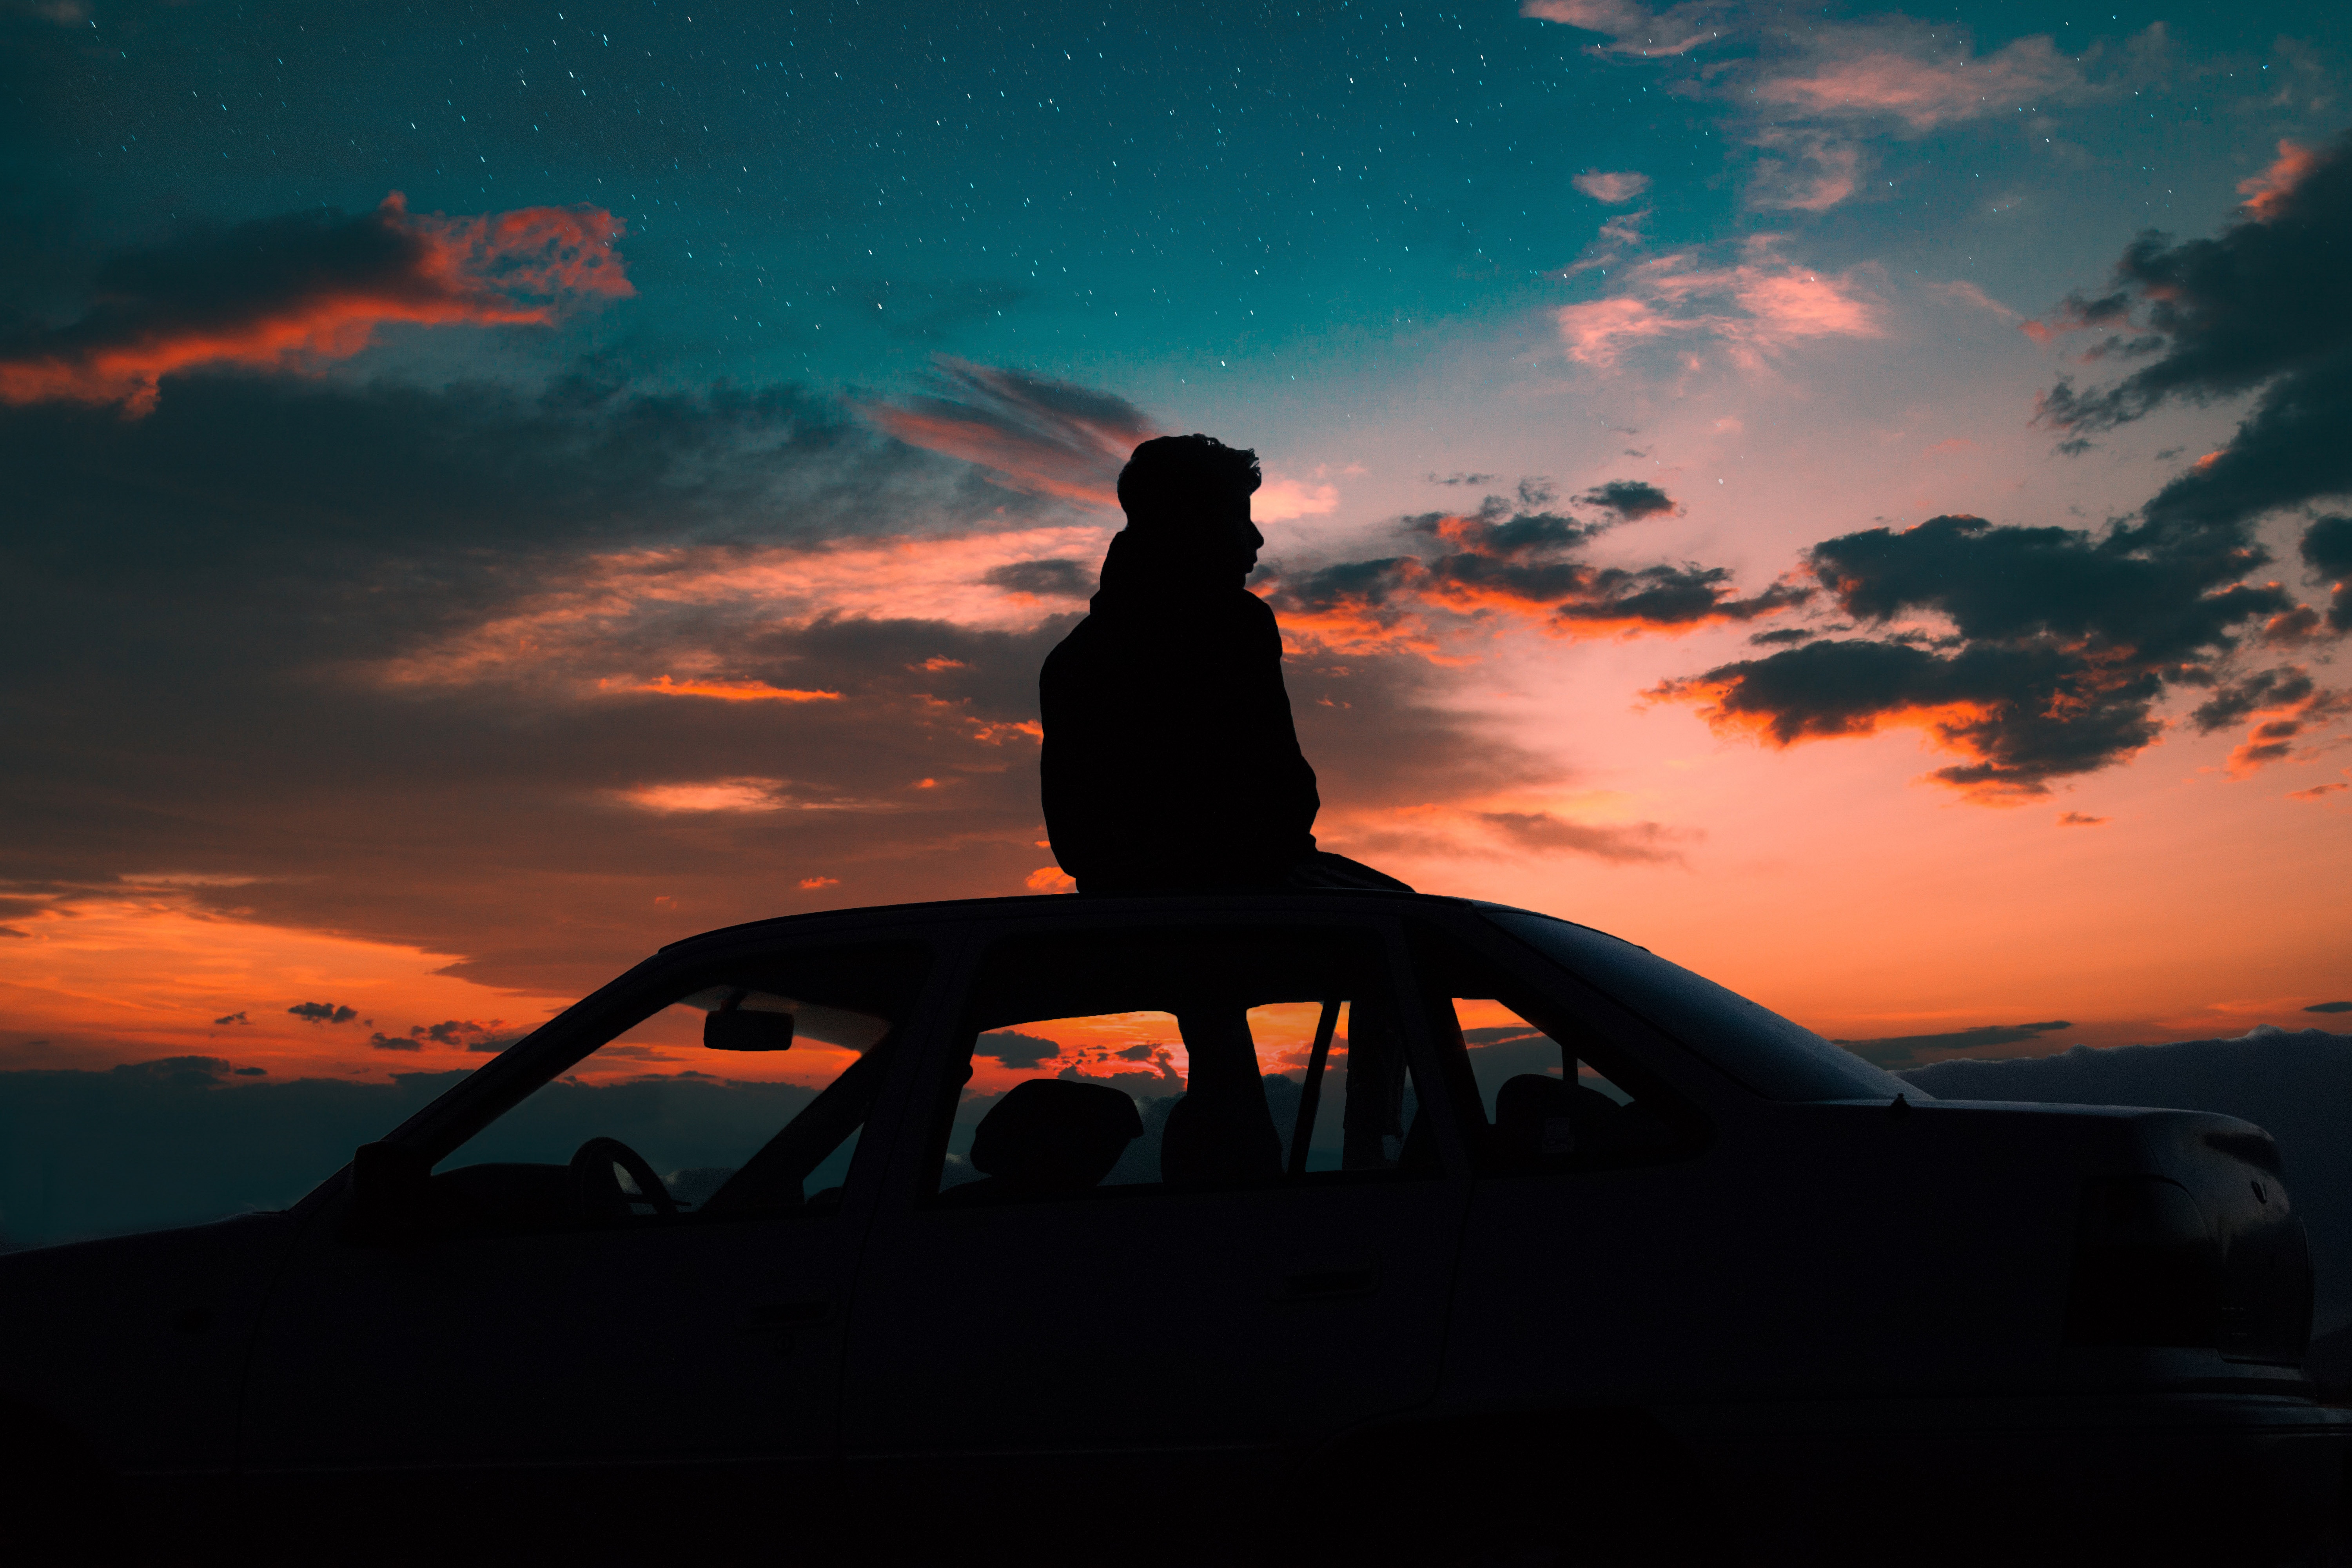 privacy, person, loneliness, dark, seclusion, car, starry sky, human